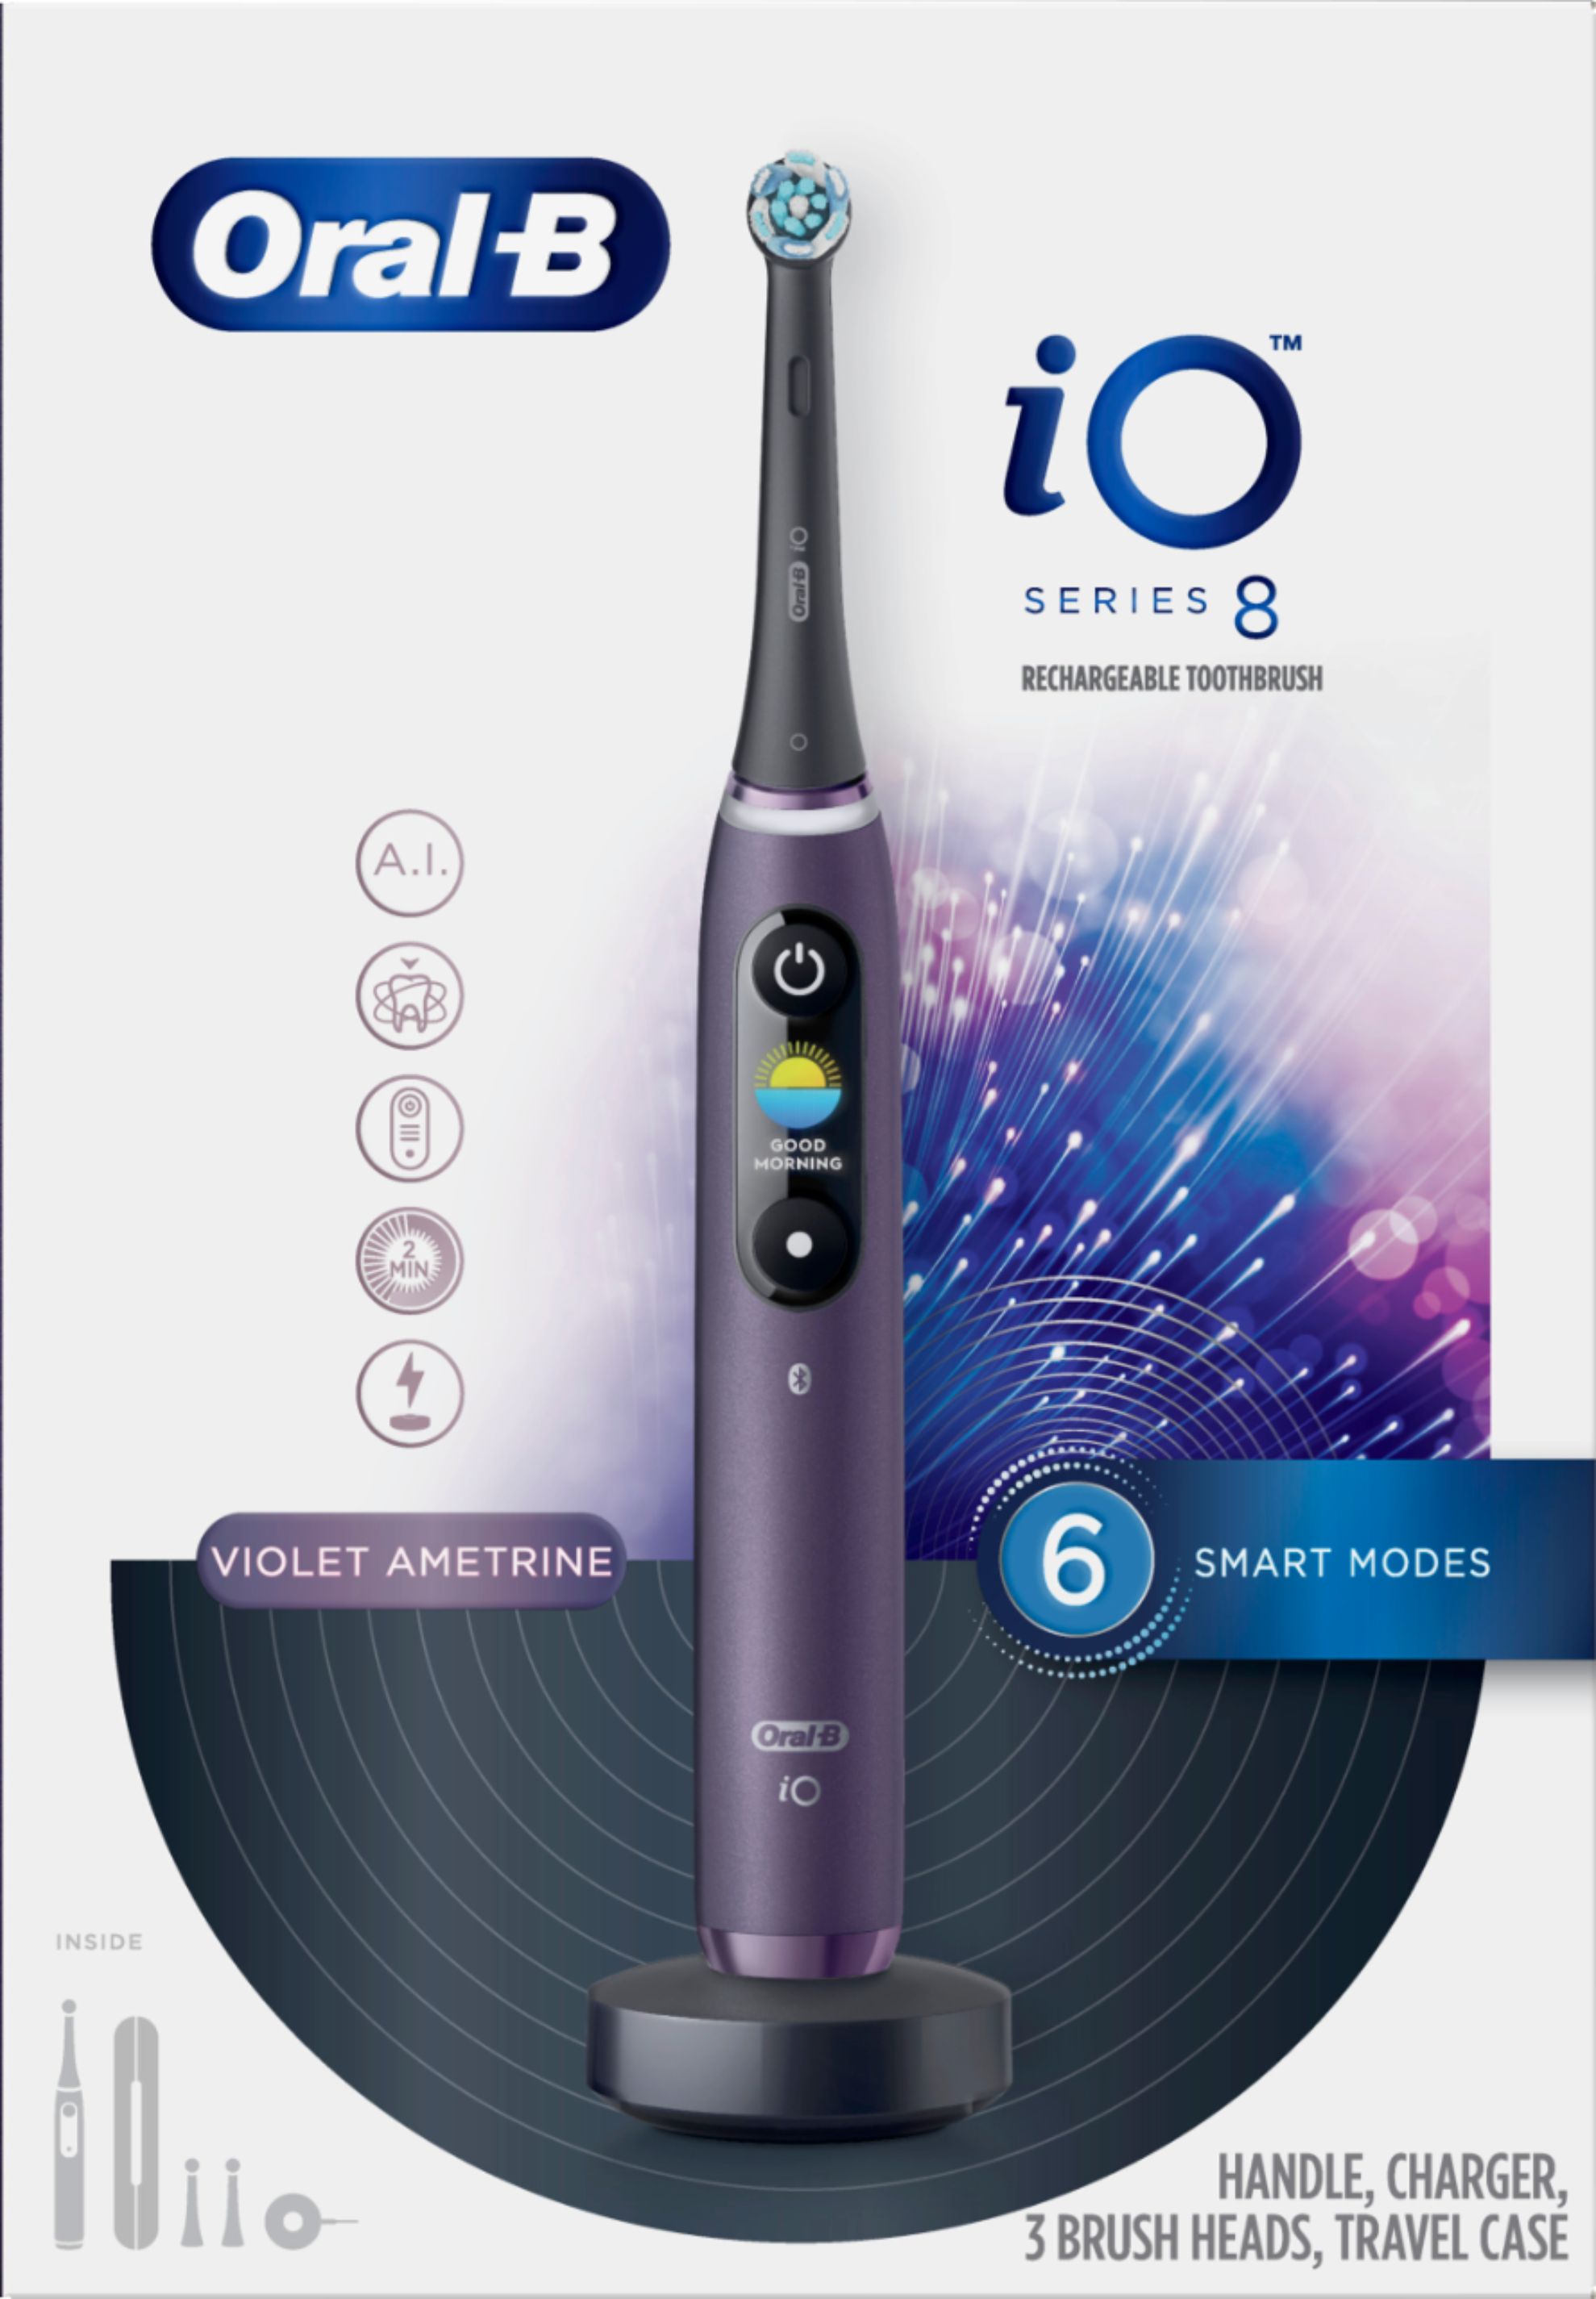 Angle View: Oral-B - iO Series 8 Connected Rechargeable Electric Toothbrush - Violet Ametrine